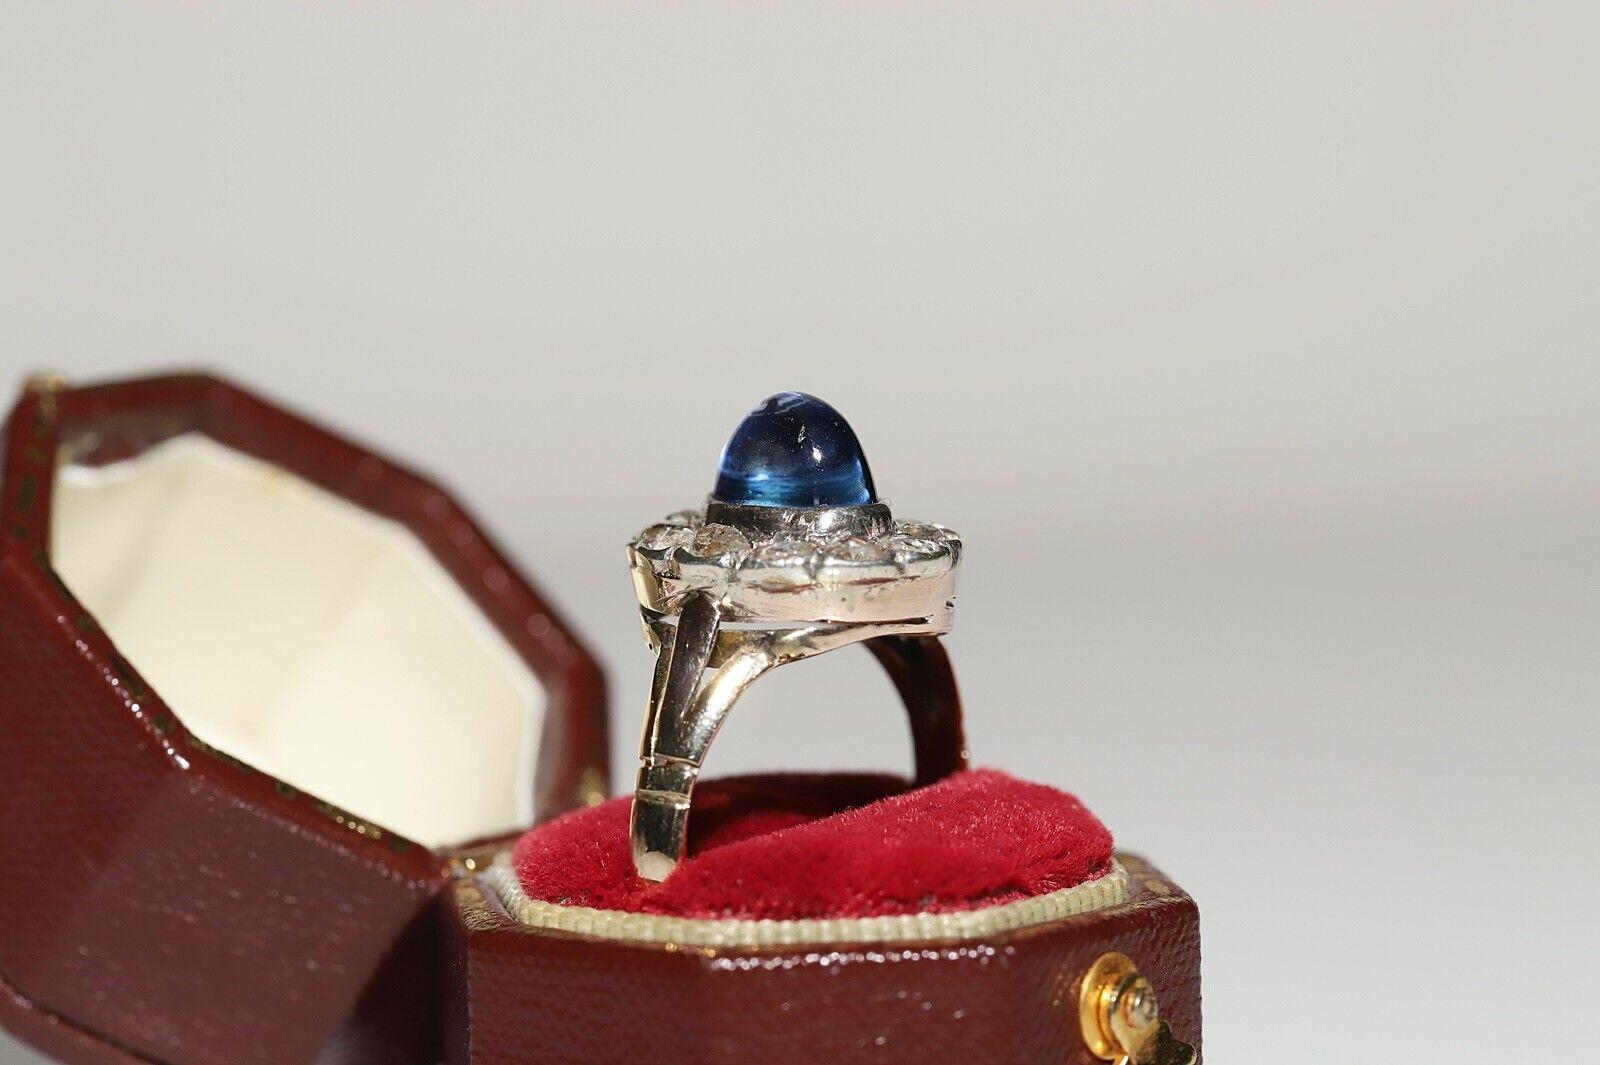 In very good condition.
Total weight is 2.8 grams.
Totally is diamond 0.60 carat.
The diamond is has  H-I-J-K color and s1-s2-s3 clarity.
Totally is tanzanite 1.80 carat.
Tanzanite was added later.
The ring dates back to 1900s.
Ring size is US 8.
We